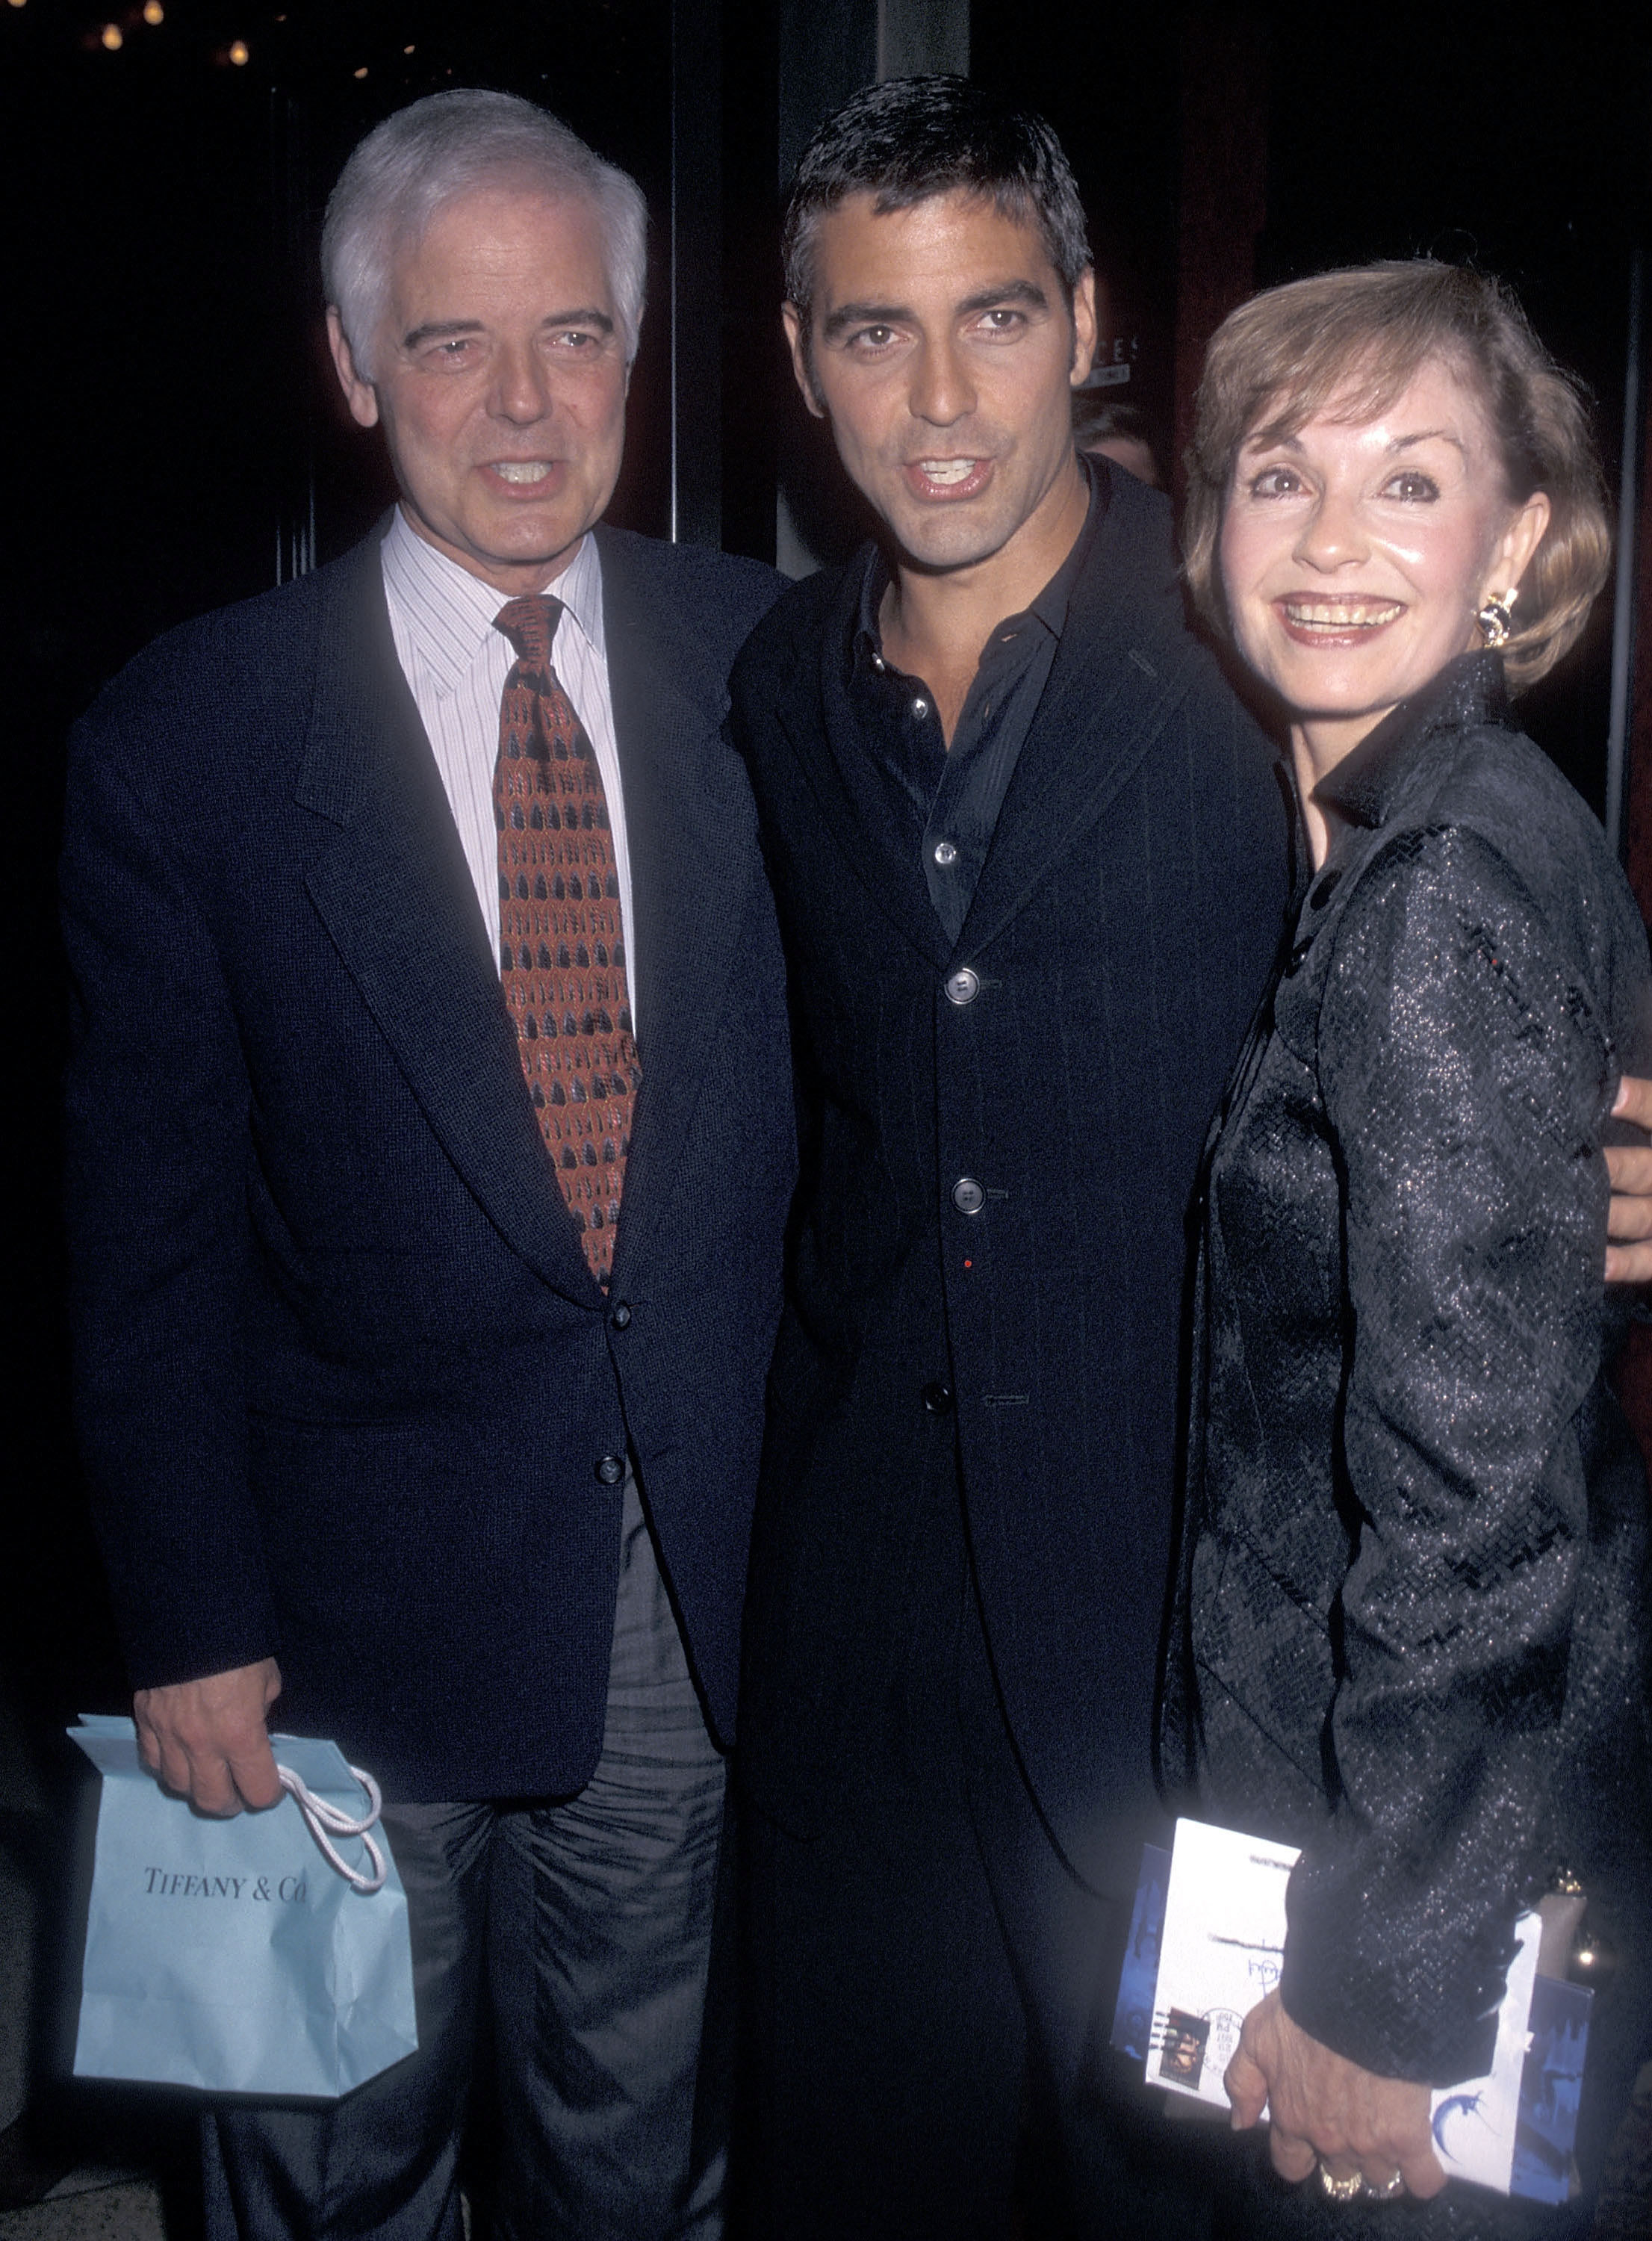 Nick Clooney, George Clooney, and Nina Warren at a premiere